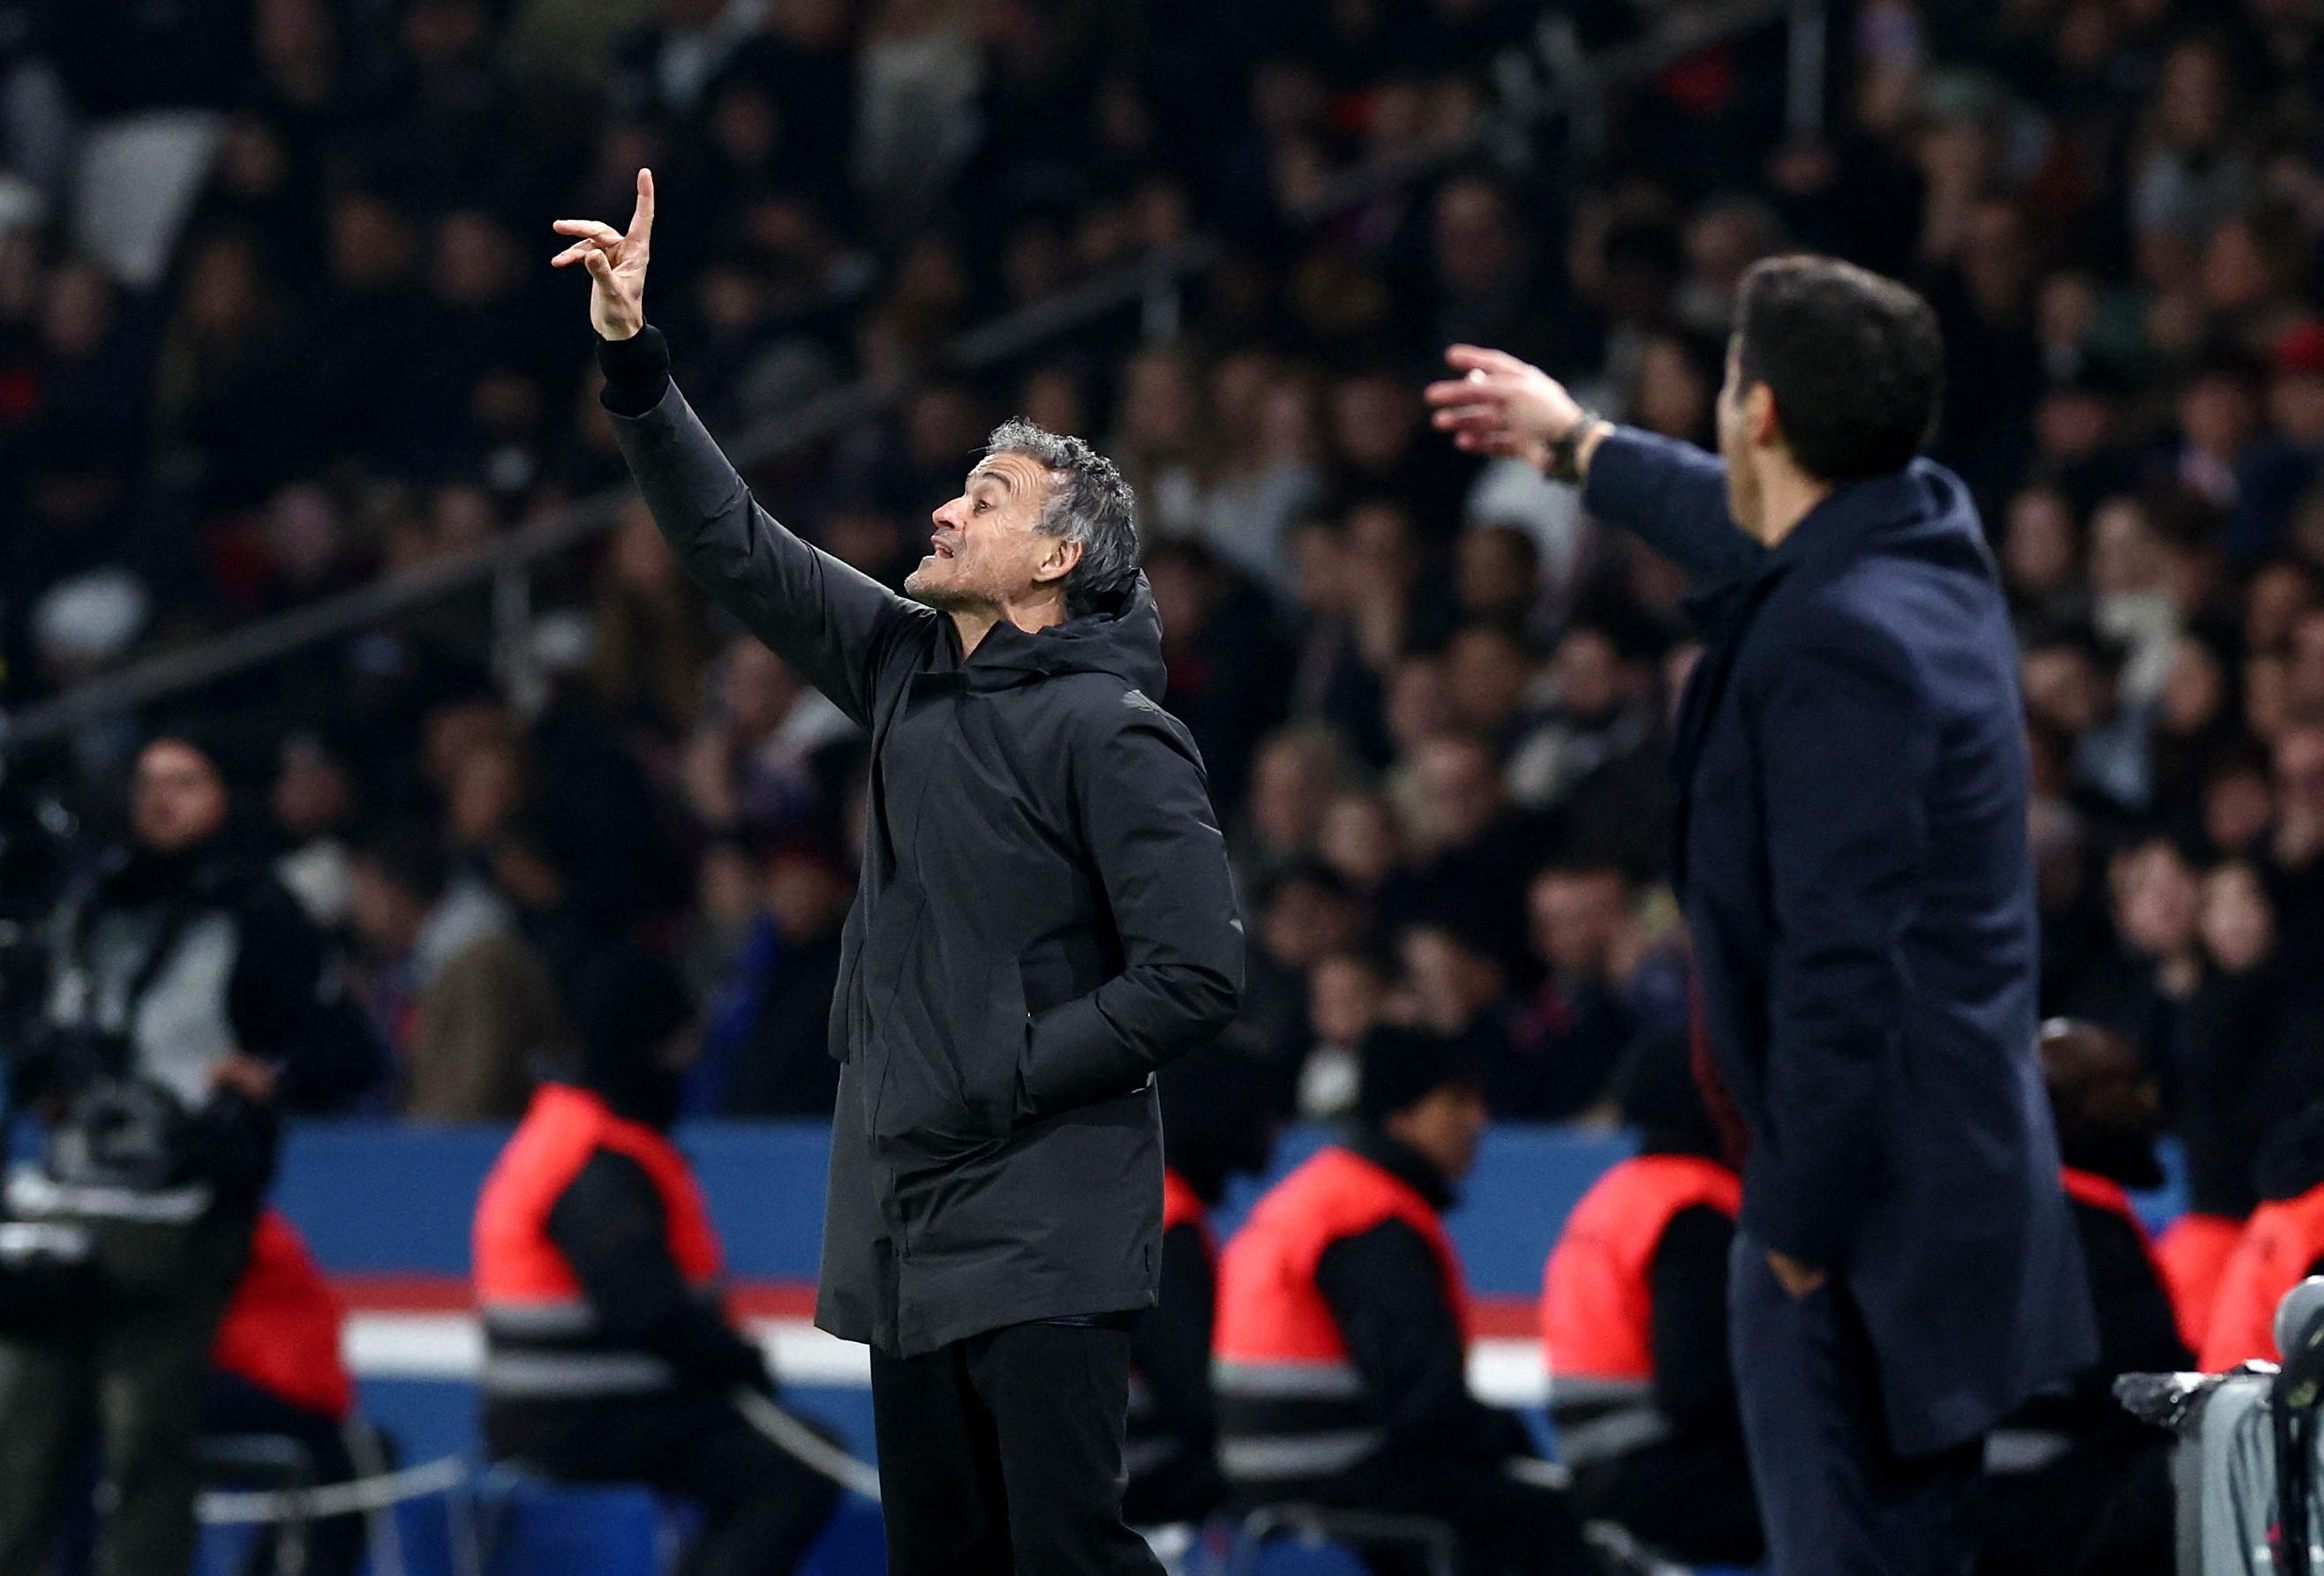 “It’s as if our lives were at stake”: Luis Enrique calls for “calm” before the Champions League